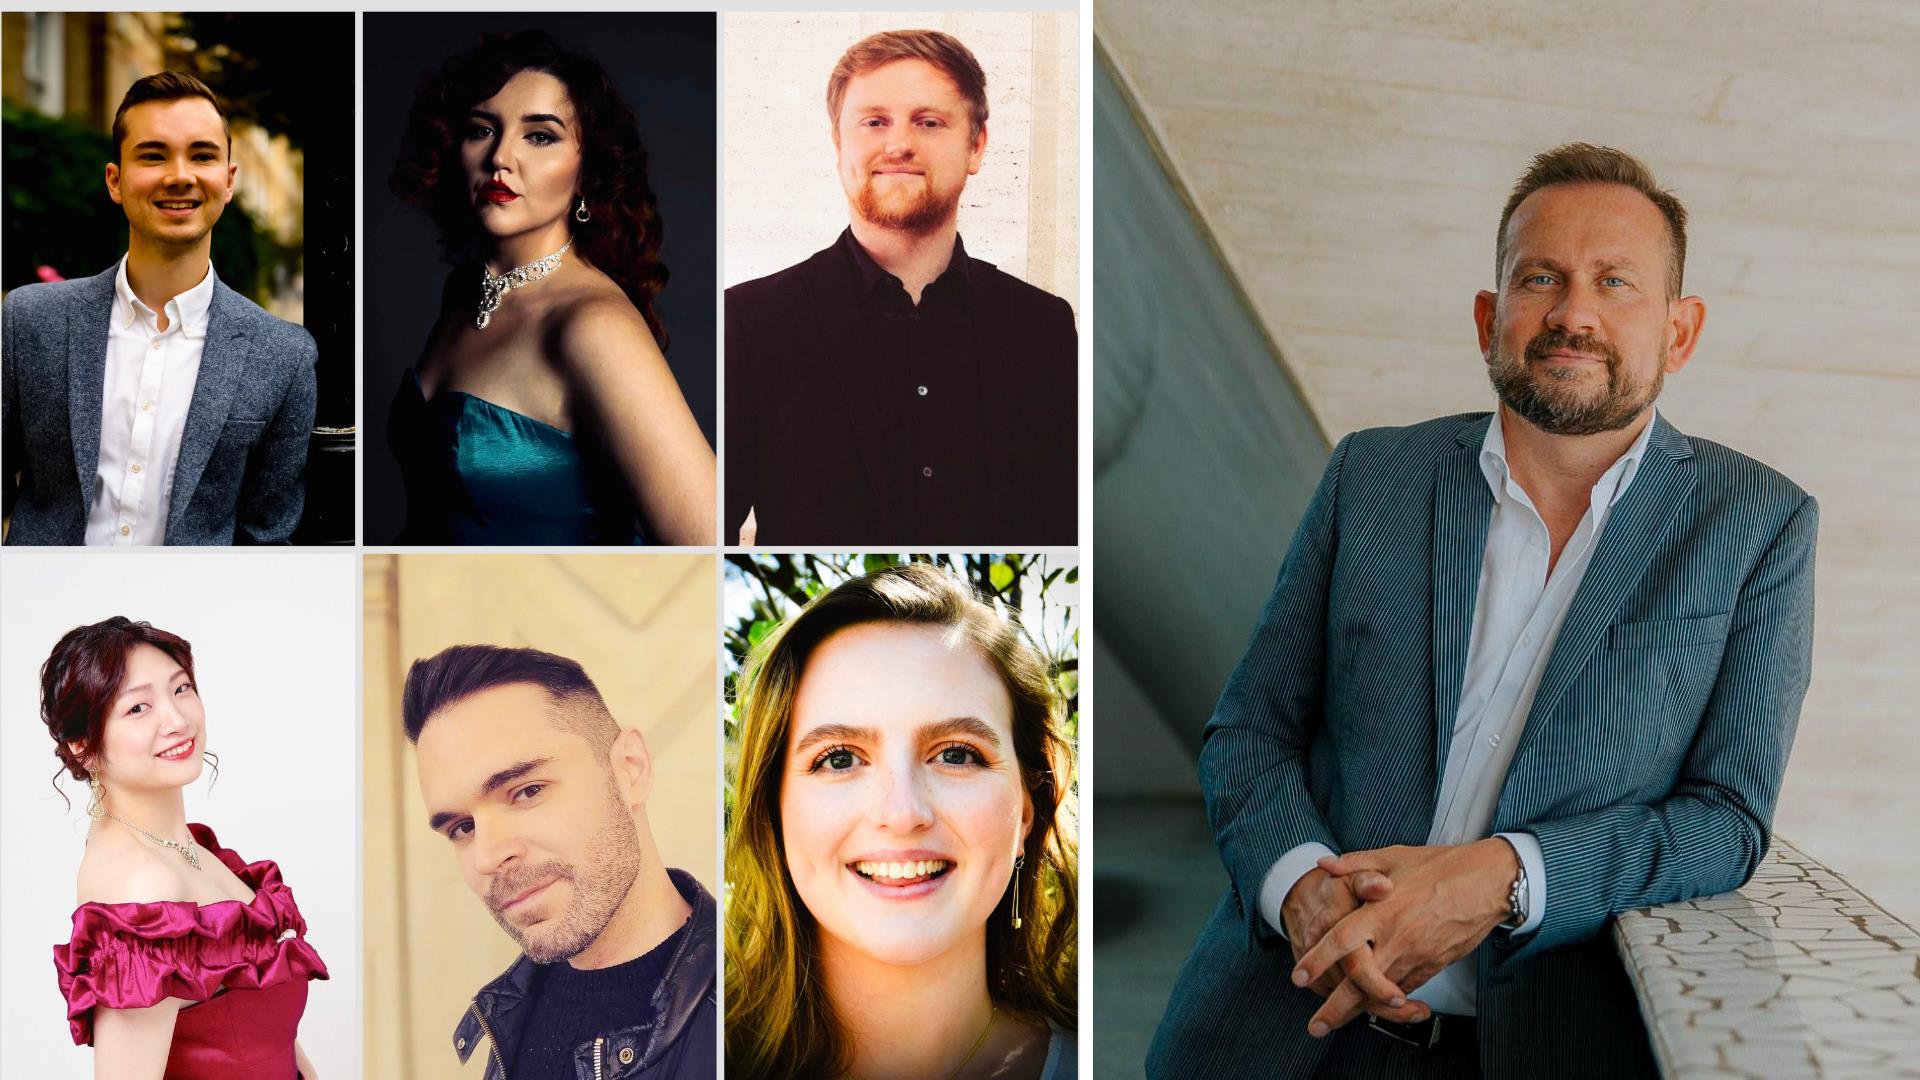 The six artists that are performing at the event, along with special guest Giulio Zappa.